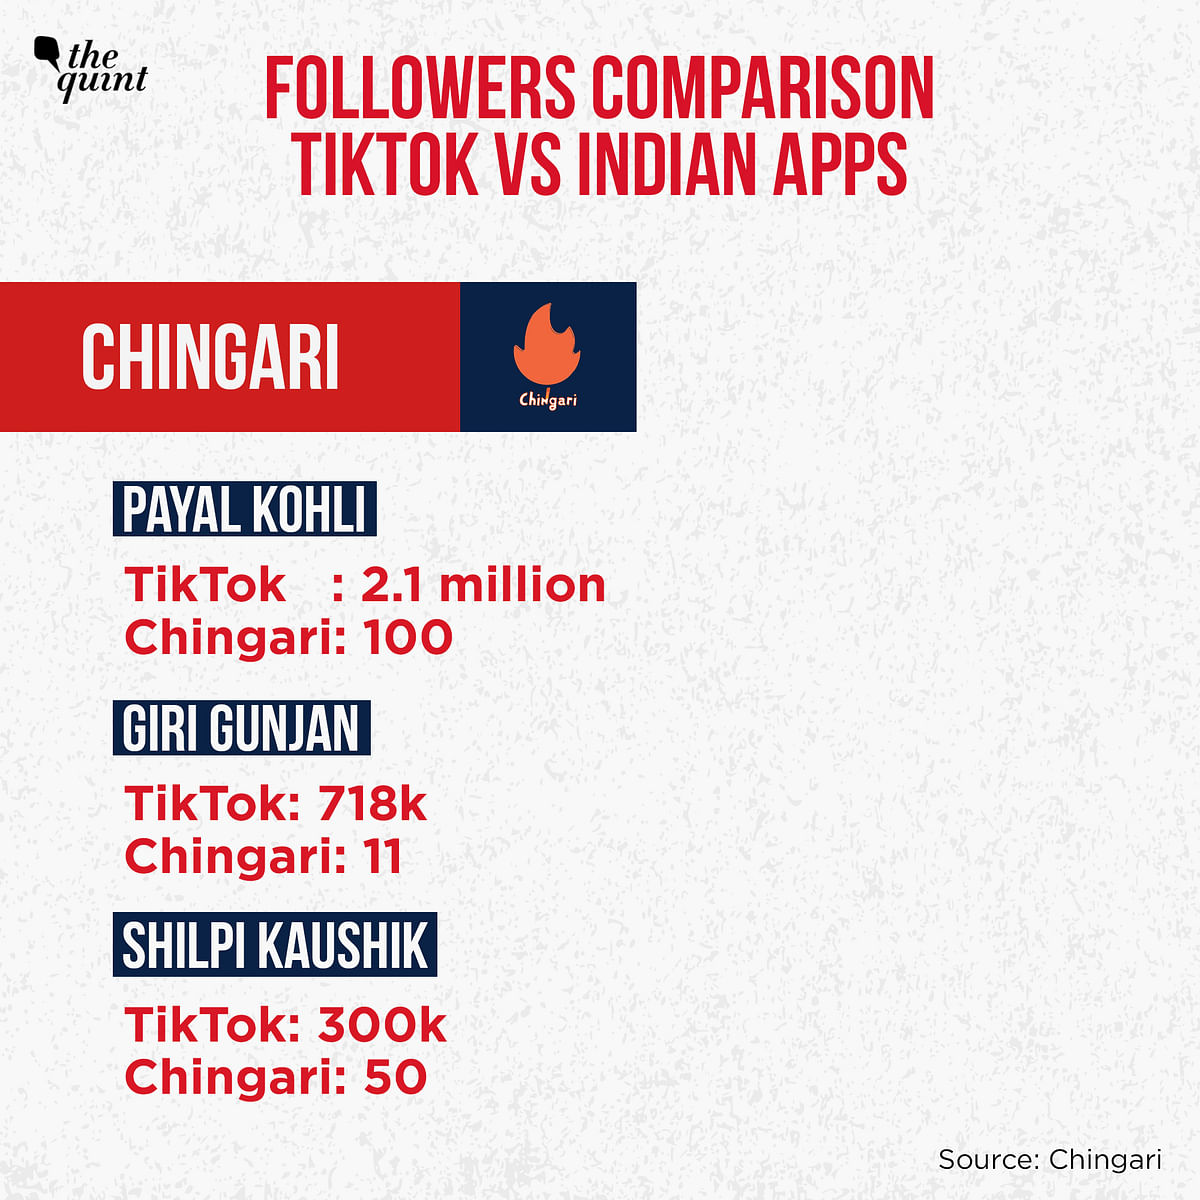 Content creators are looking to start afresh by migrating to Indian apps like Chingari, Trell, Roposo and Mitron.